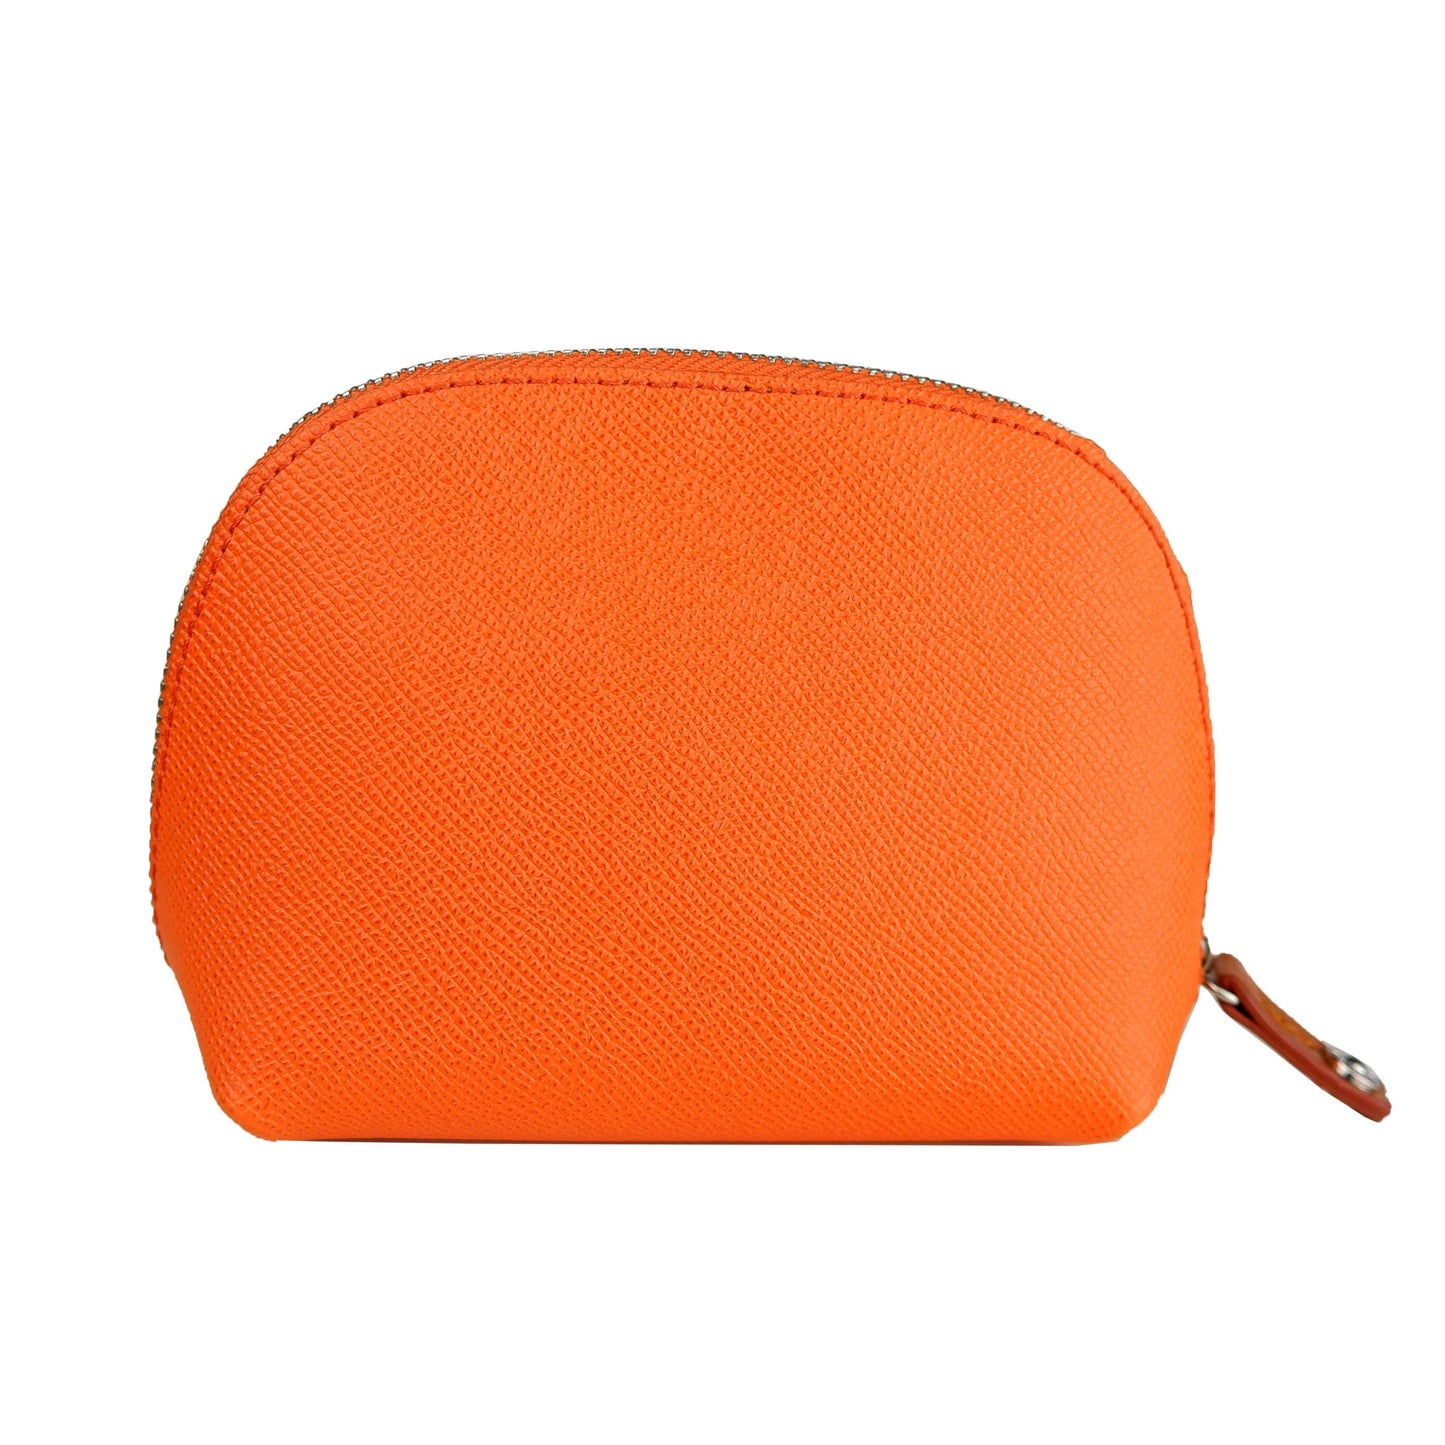 Chic Orange Leather Cosmetic Bag with Logo